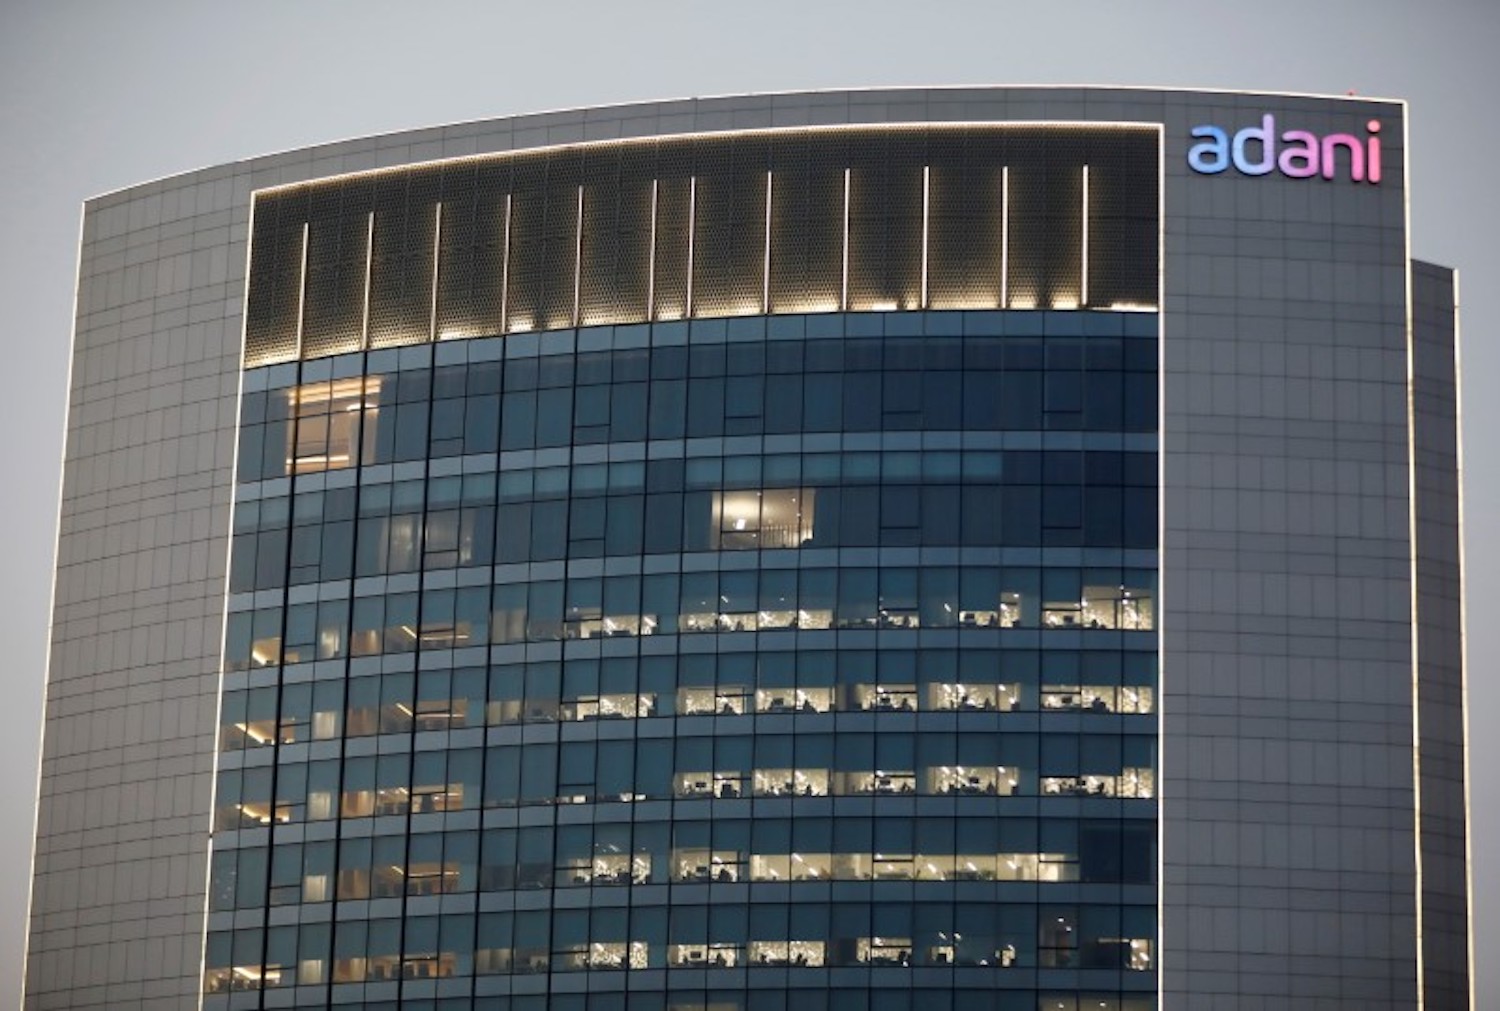 The logo of the Adani Group is seen on the facade of one of its buildings on the outskirts of Ahmedabad, India